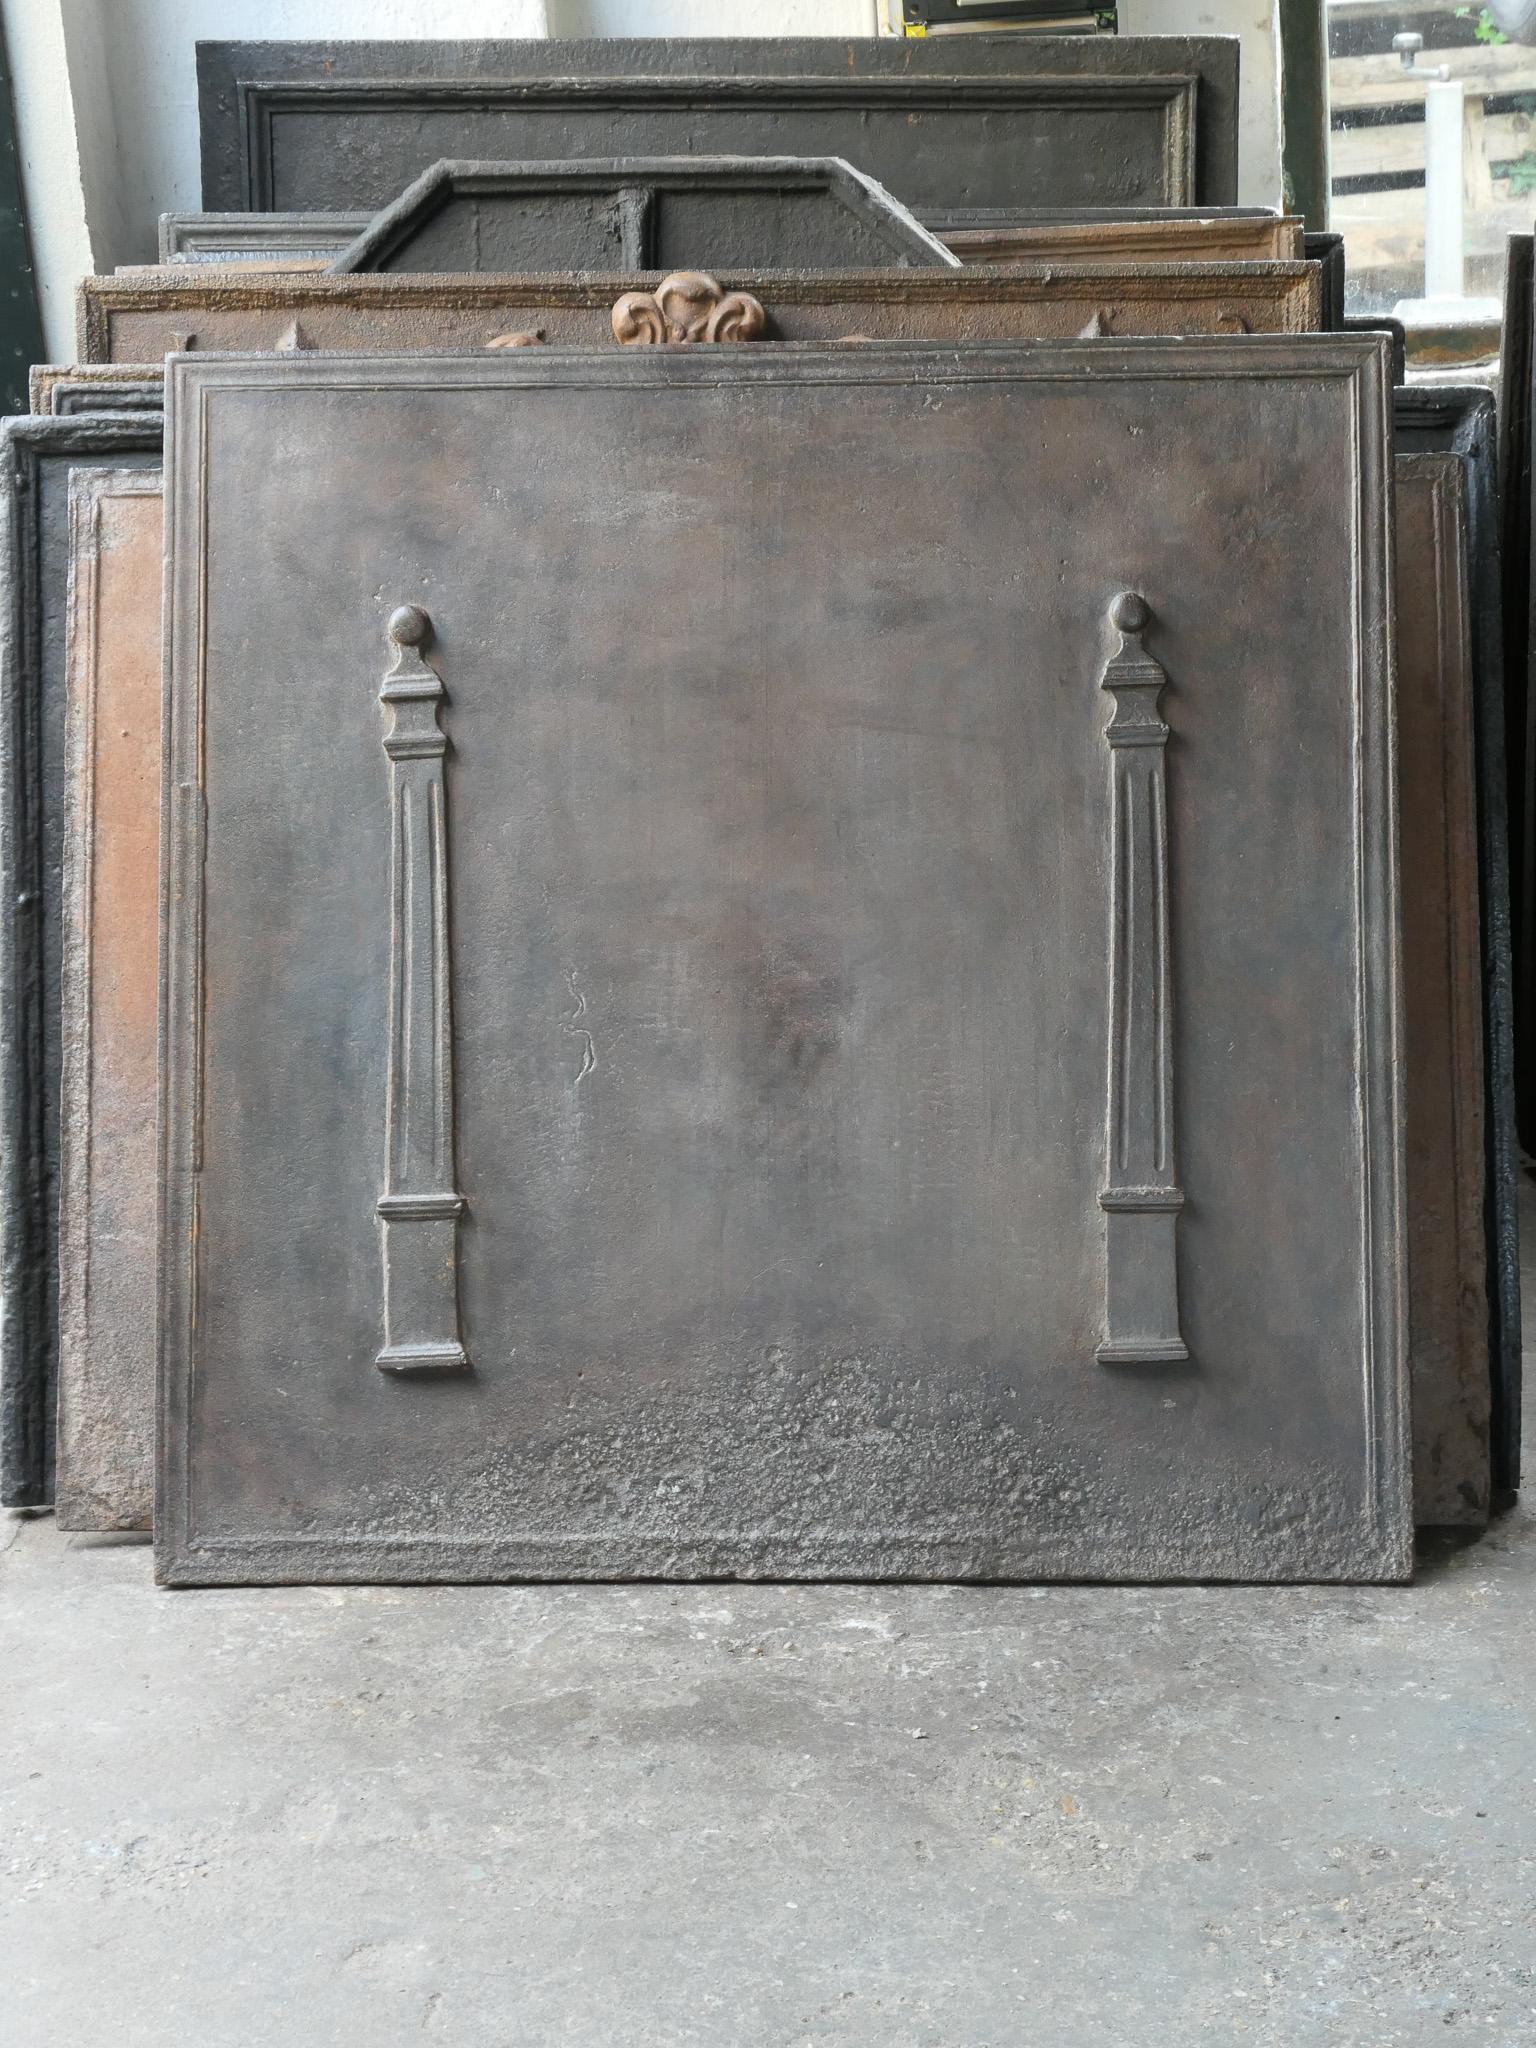 Early 19th century French Neoclassical fireback with two pillars of freedom. The pillars symbolize the value liberty, one of the three values of the French revolution. 

The fireback is made of cast iron and has a brown patina. Upon request it can